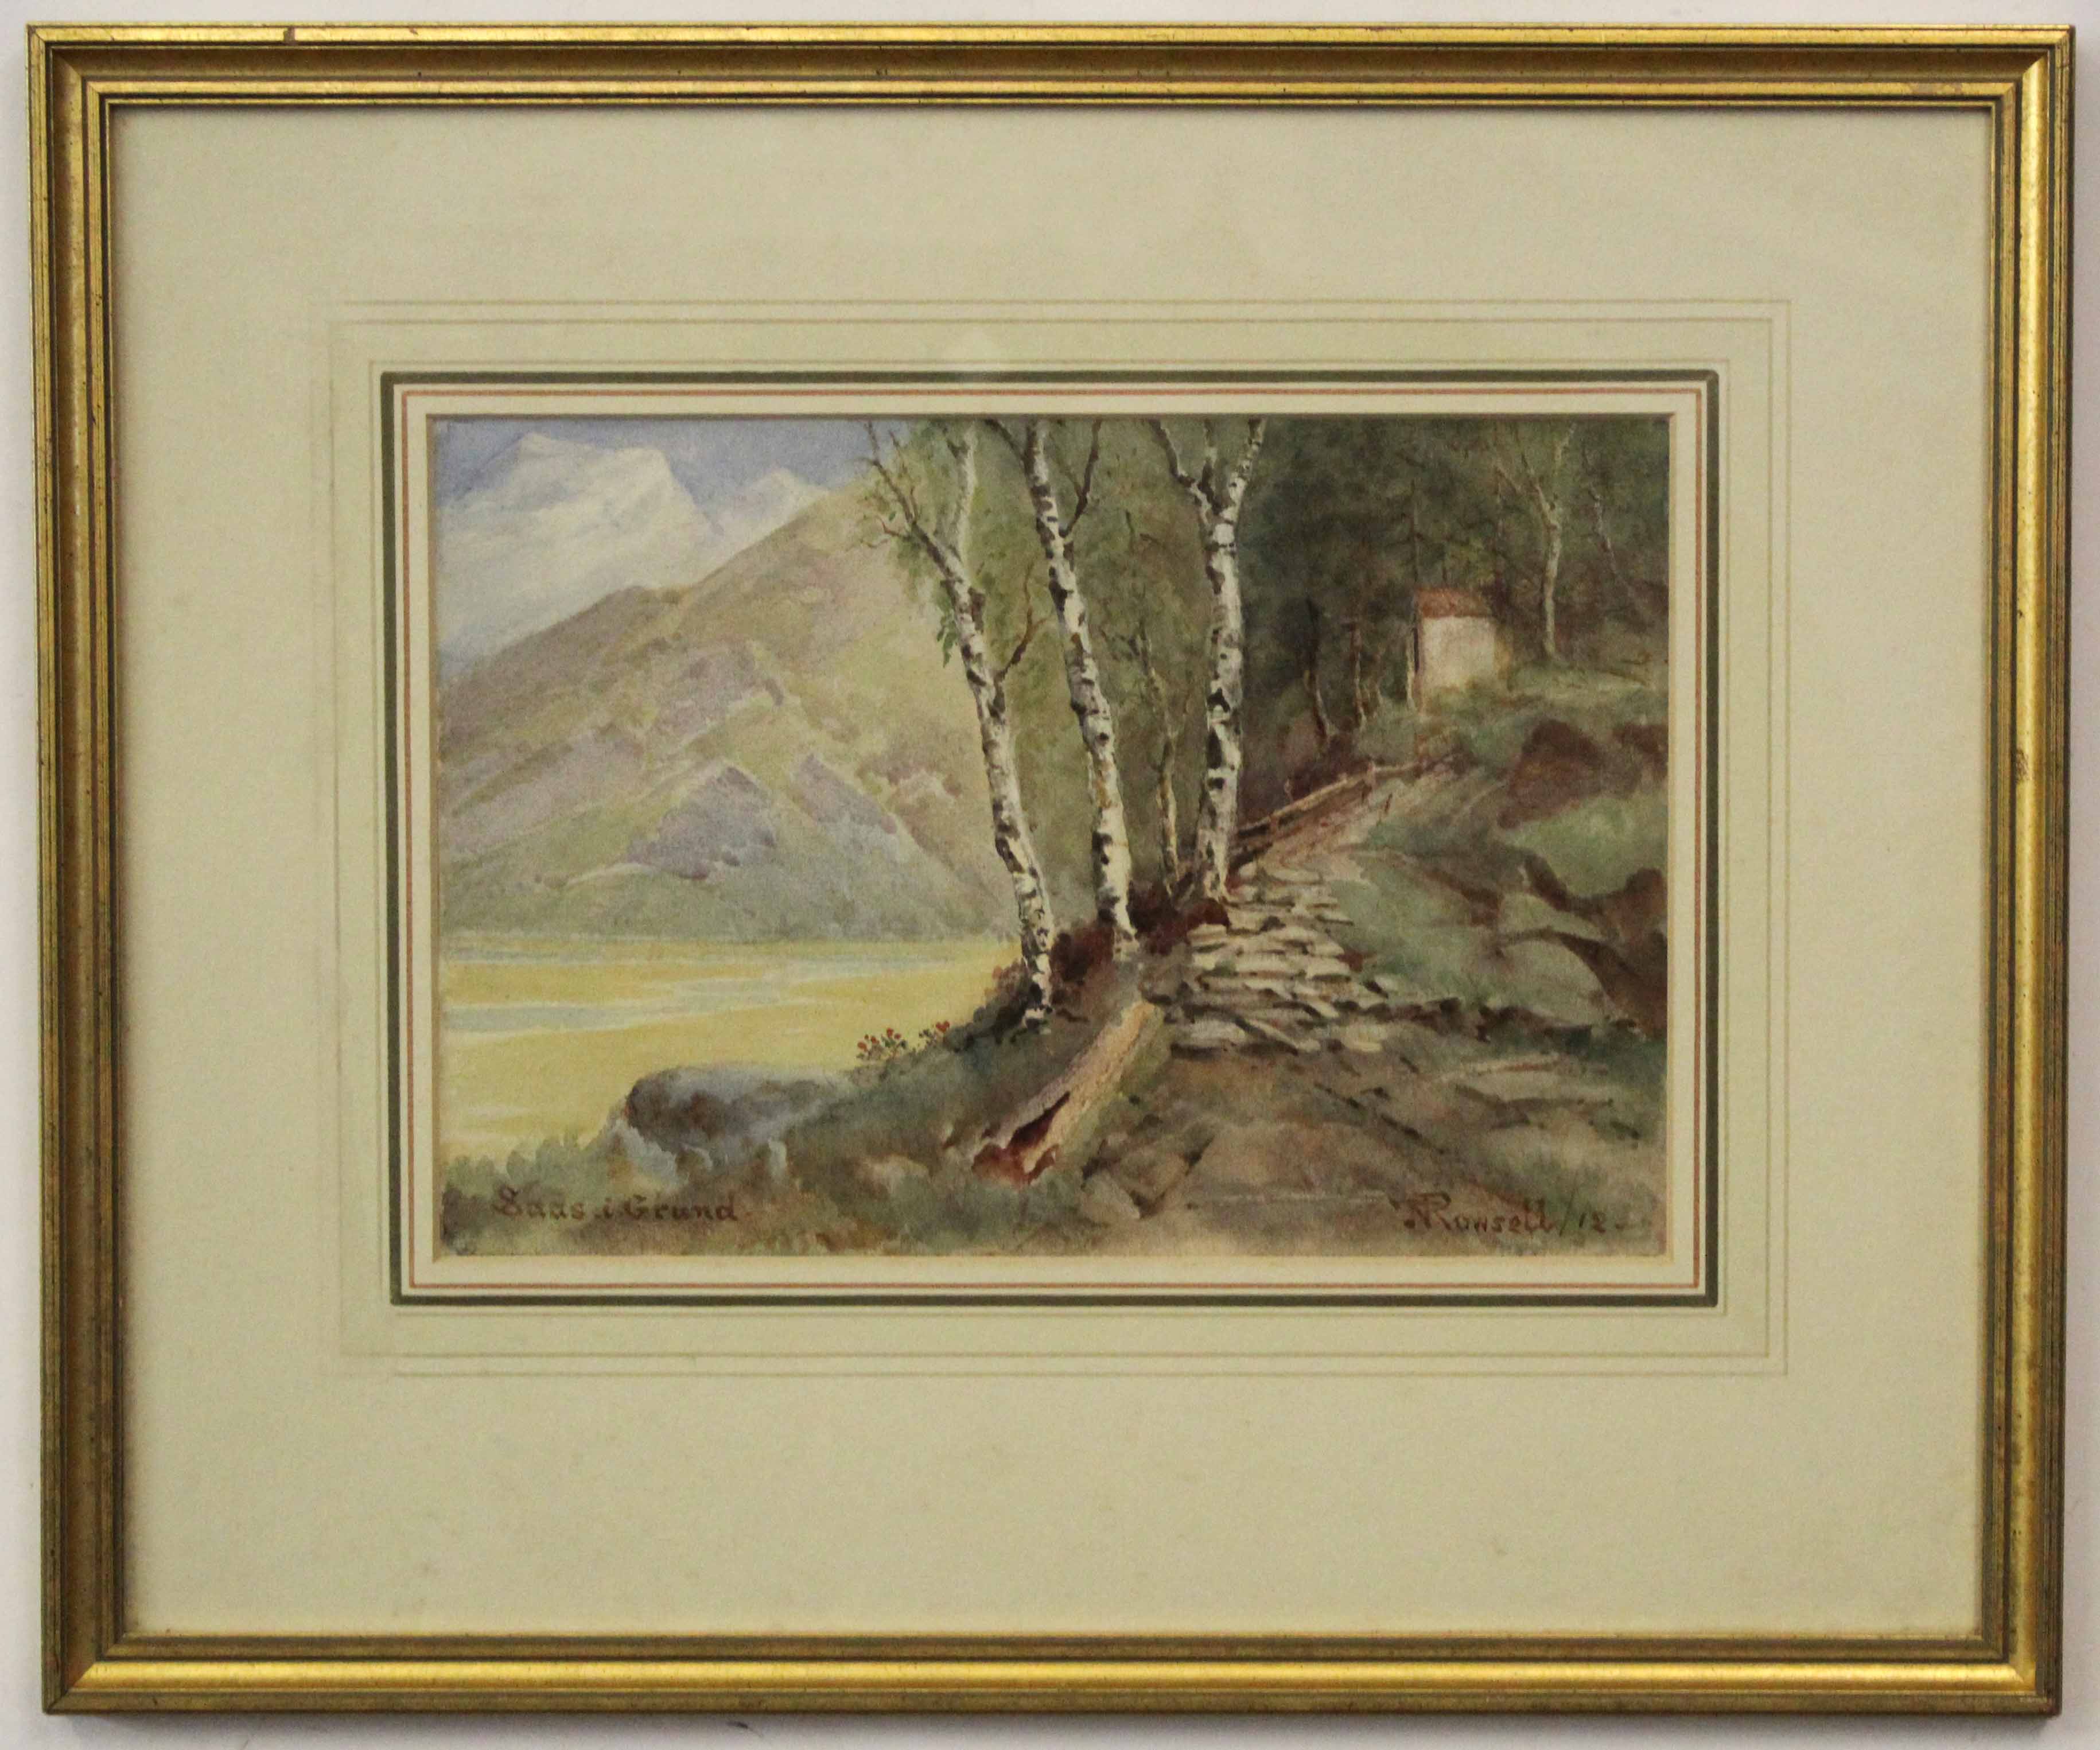 T Rowsell, signed and dated 12, watercolour, inscribed "Baas I Grund", 23 x 33cm